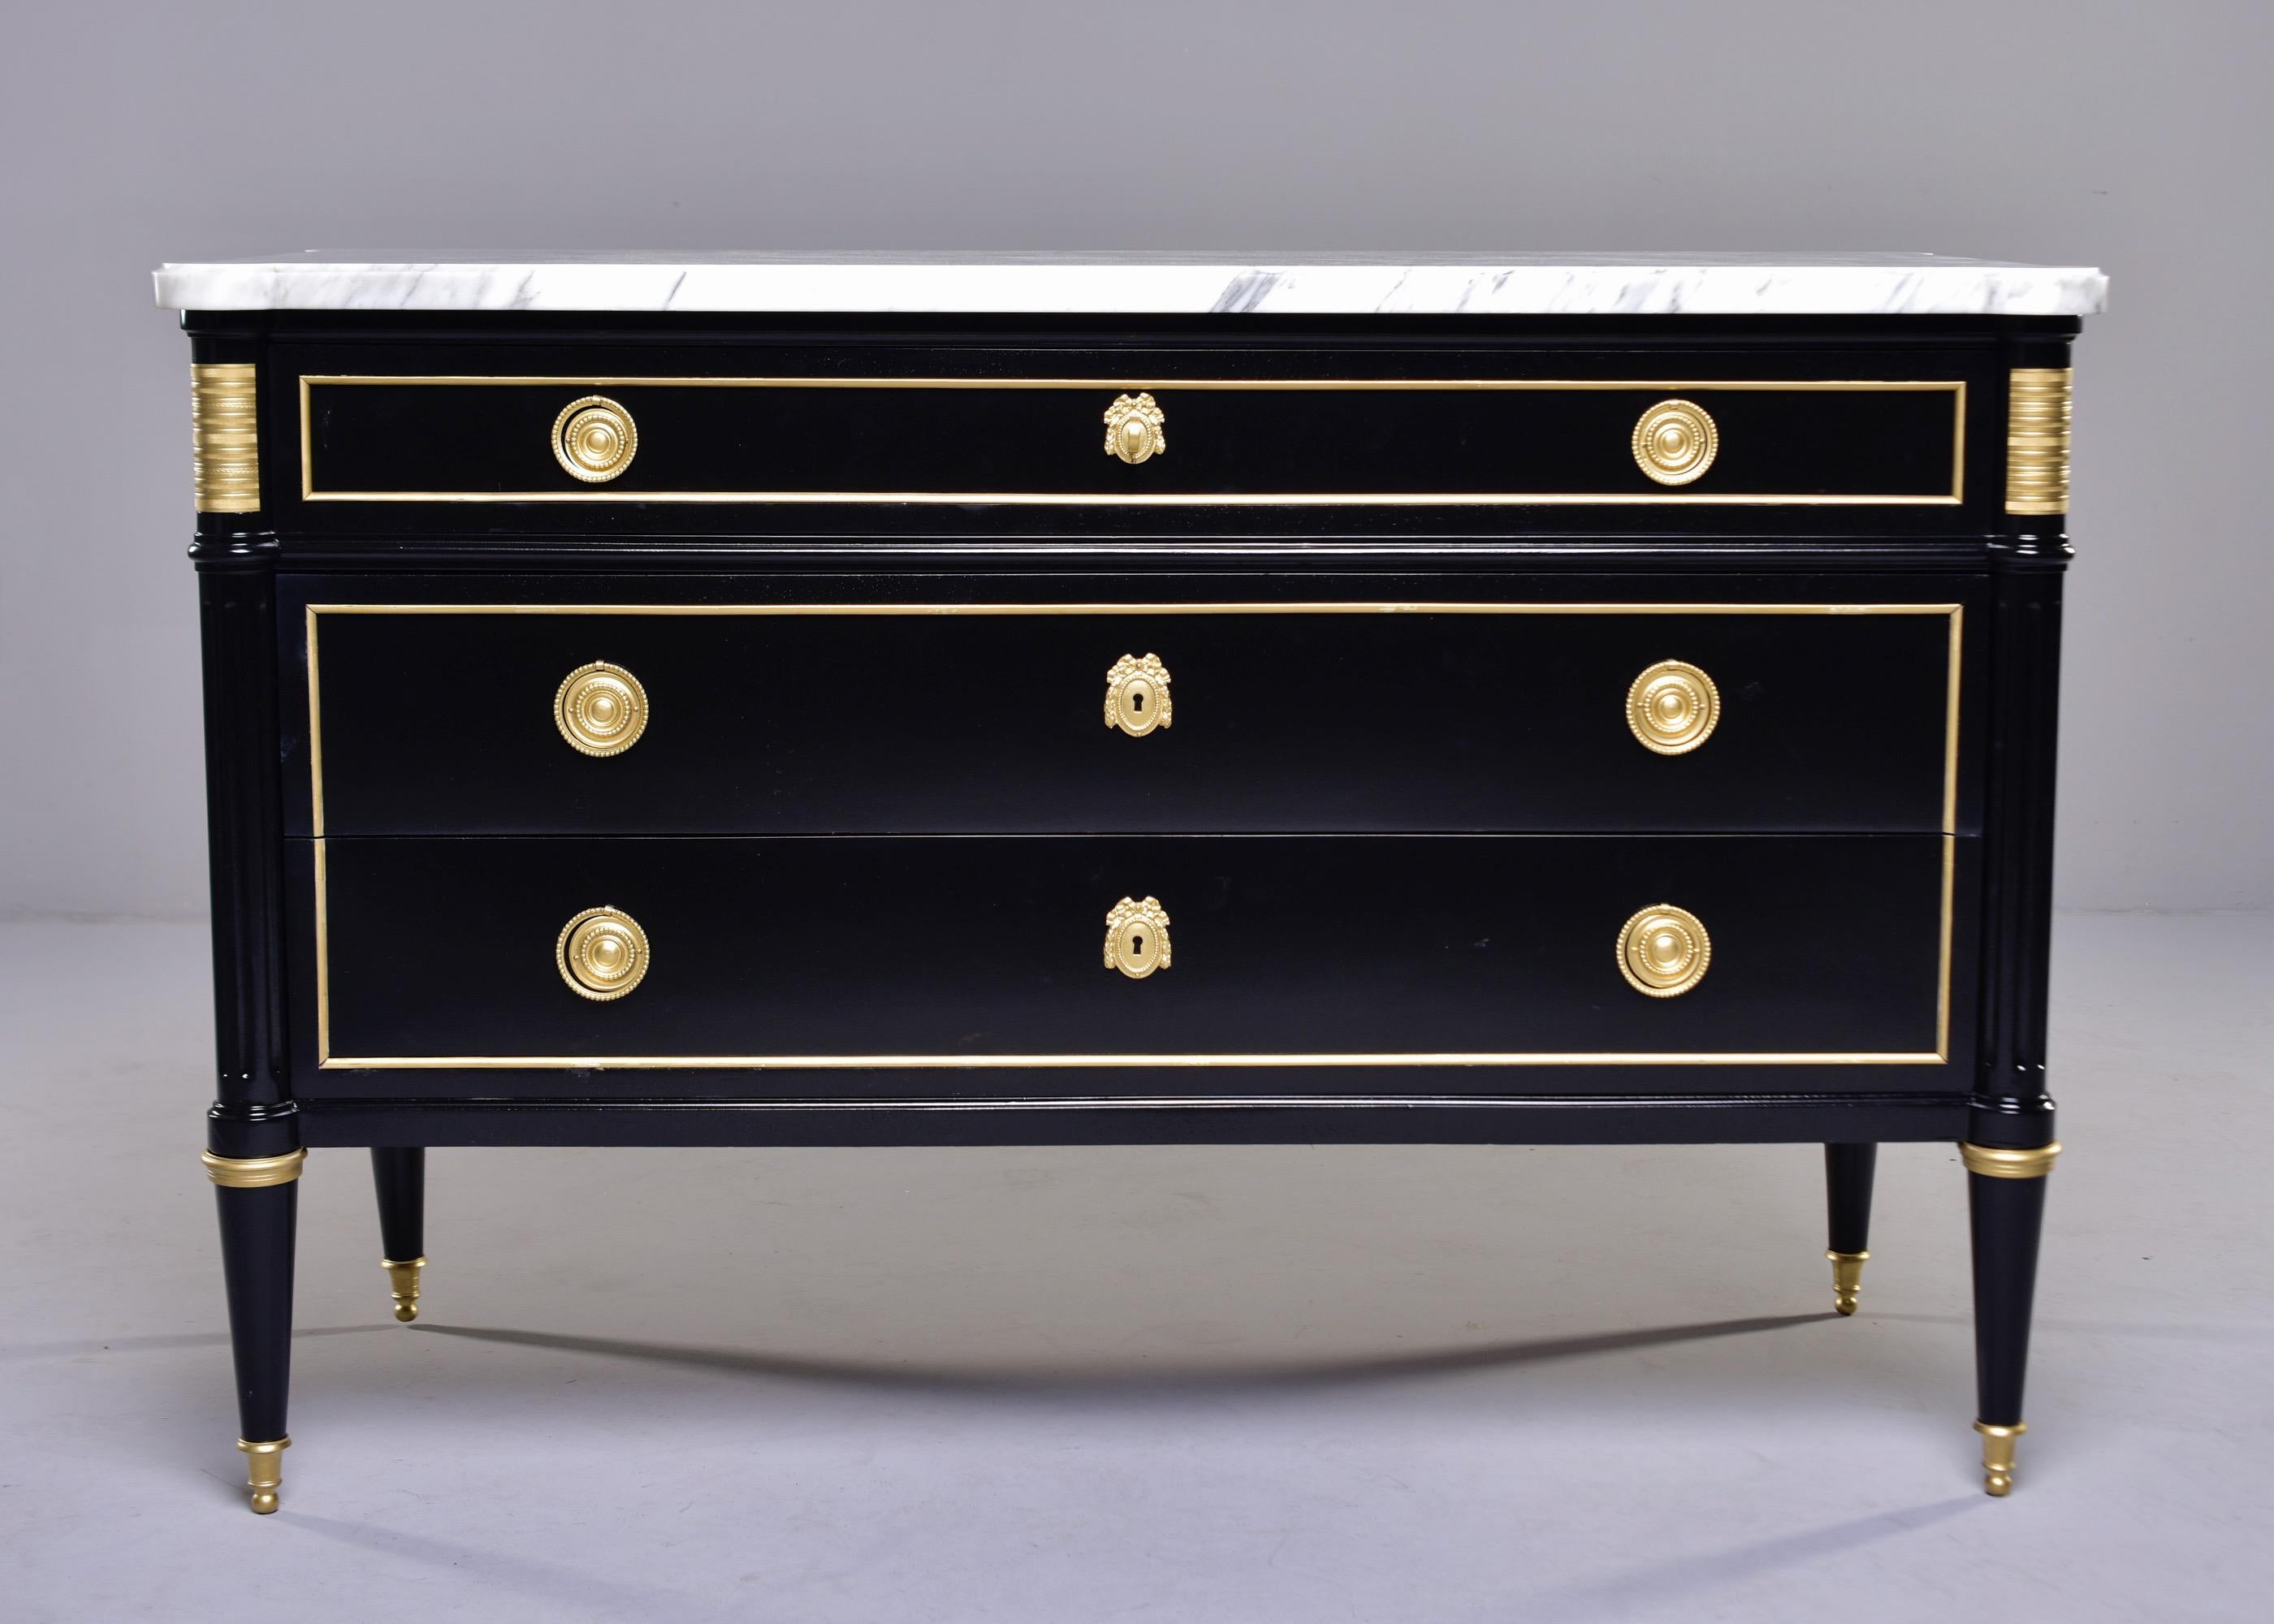 Circa 1920s Louis XVI style three drawer commode in mahogany with new black finish features brass hardware and trim, functional locks and white marble top. Unknown maker.